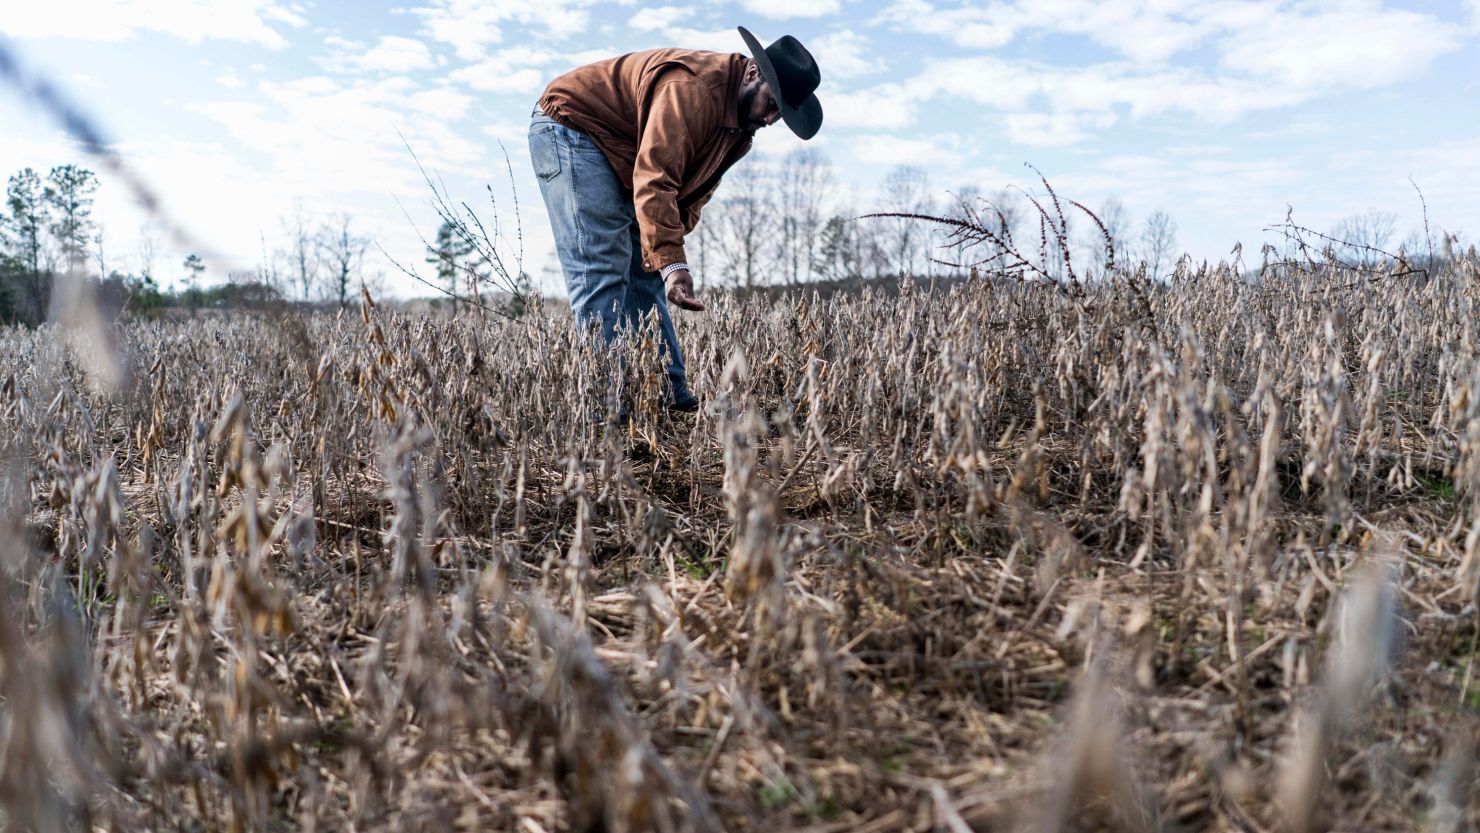 Fourth generation crop farmer John Boyd, and president of the Black Farmer's Association, checks the condition of a soybean field for harvesting in Baskerville, Virginia in January 2019.